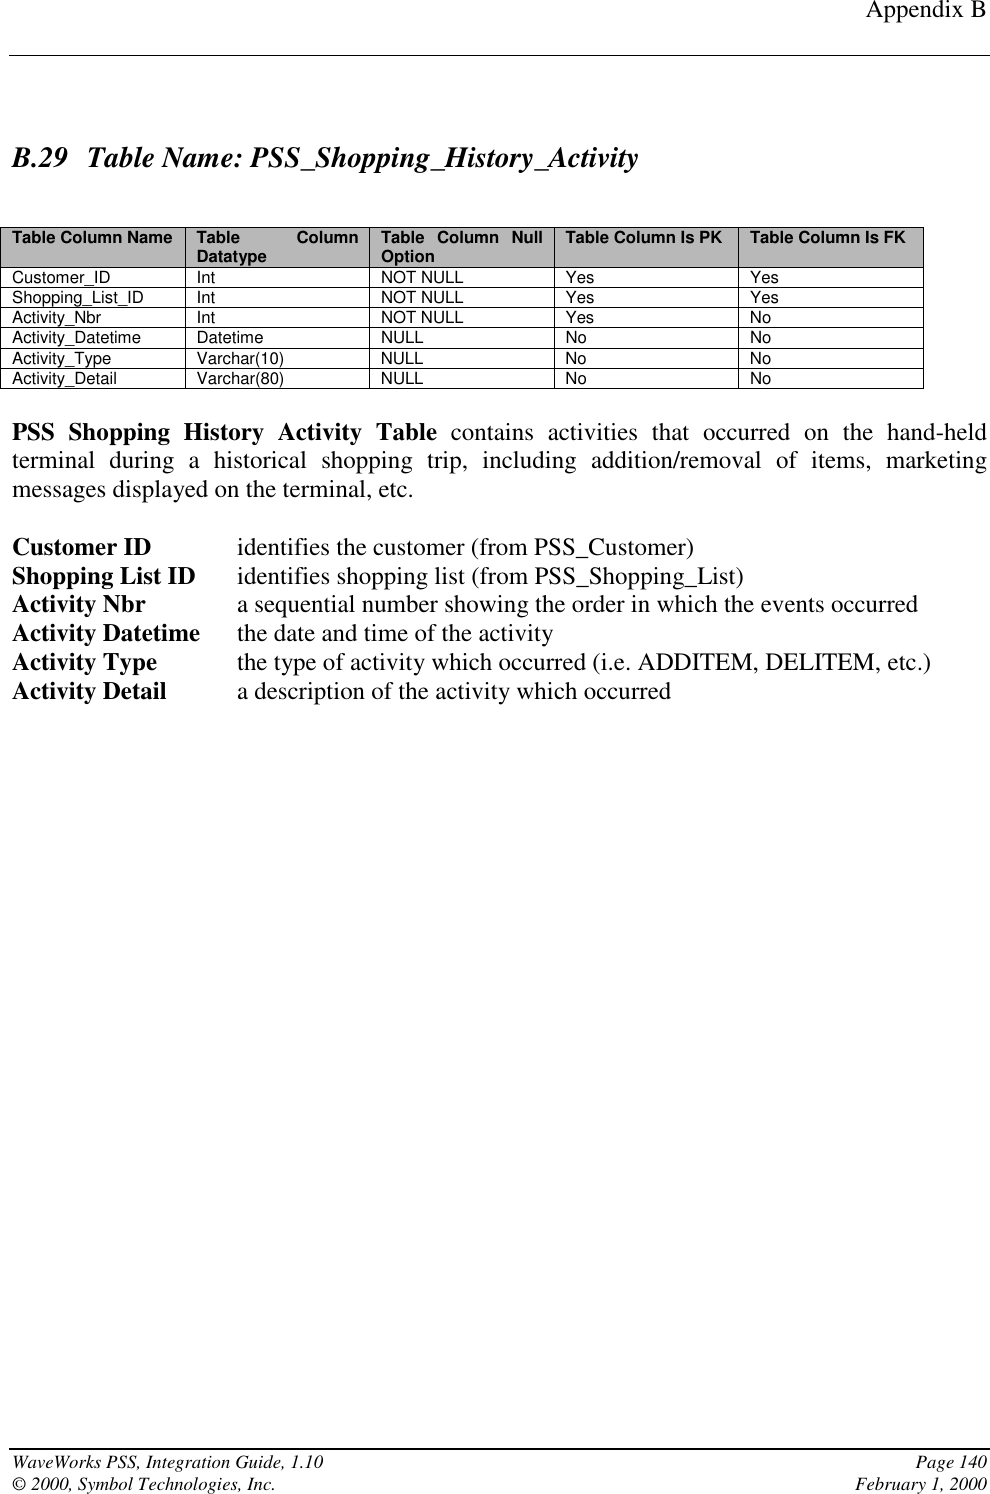 Appendix BWaveWorks PSS, Integration Guide, 1.10 Page 140© 2000, Symbol Technologies, Inc. February 1, 2000B.29 Table Name: PSS_Shopping_History_ActivityTable Column Name Table ColumnDatatype Table Column NullOption Table Column Is PK Table Column Is FKCustomer_ID Int NOT NULL Yes YesShopping_List_ID Int NOT NULL Yes YesActivity_Nbr Int NOT NULL Yes NoActivity_Datetime Datetime NULL No NoActivity_Type Varchar(10) NULL No NoActivity_Detail Varchar(80) NULL No NoPSS Shopping History Activity Table contains activities that occurred on the hand-heldterminal during a historical shopping trip, including addition/removal of items, marketingmessages displayed on the terminal, etc.Customer ID identifies the customer (from PSS_Customer)Shopping List ID identifies shopping list (from PSS_Shopping_List)Activity Nbr a sequential number showing the order in which the events occurredActivity Datetime the date and time of the activityActivity Type the type of activity which occurred (i.e. ADDITEM, DELITEM, etc.)Activity Detail a description of the activity which occurred